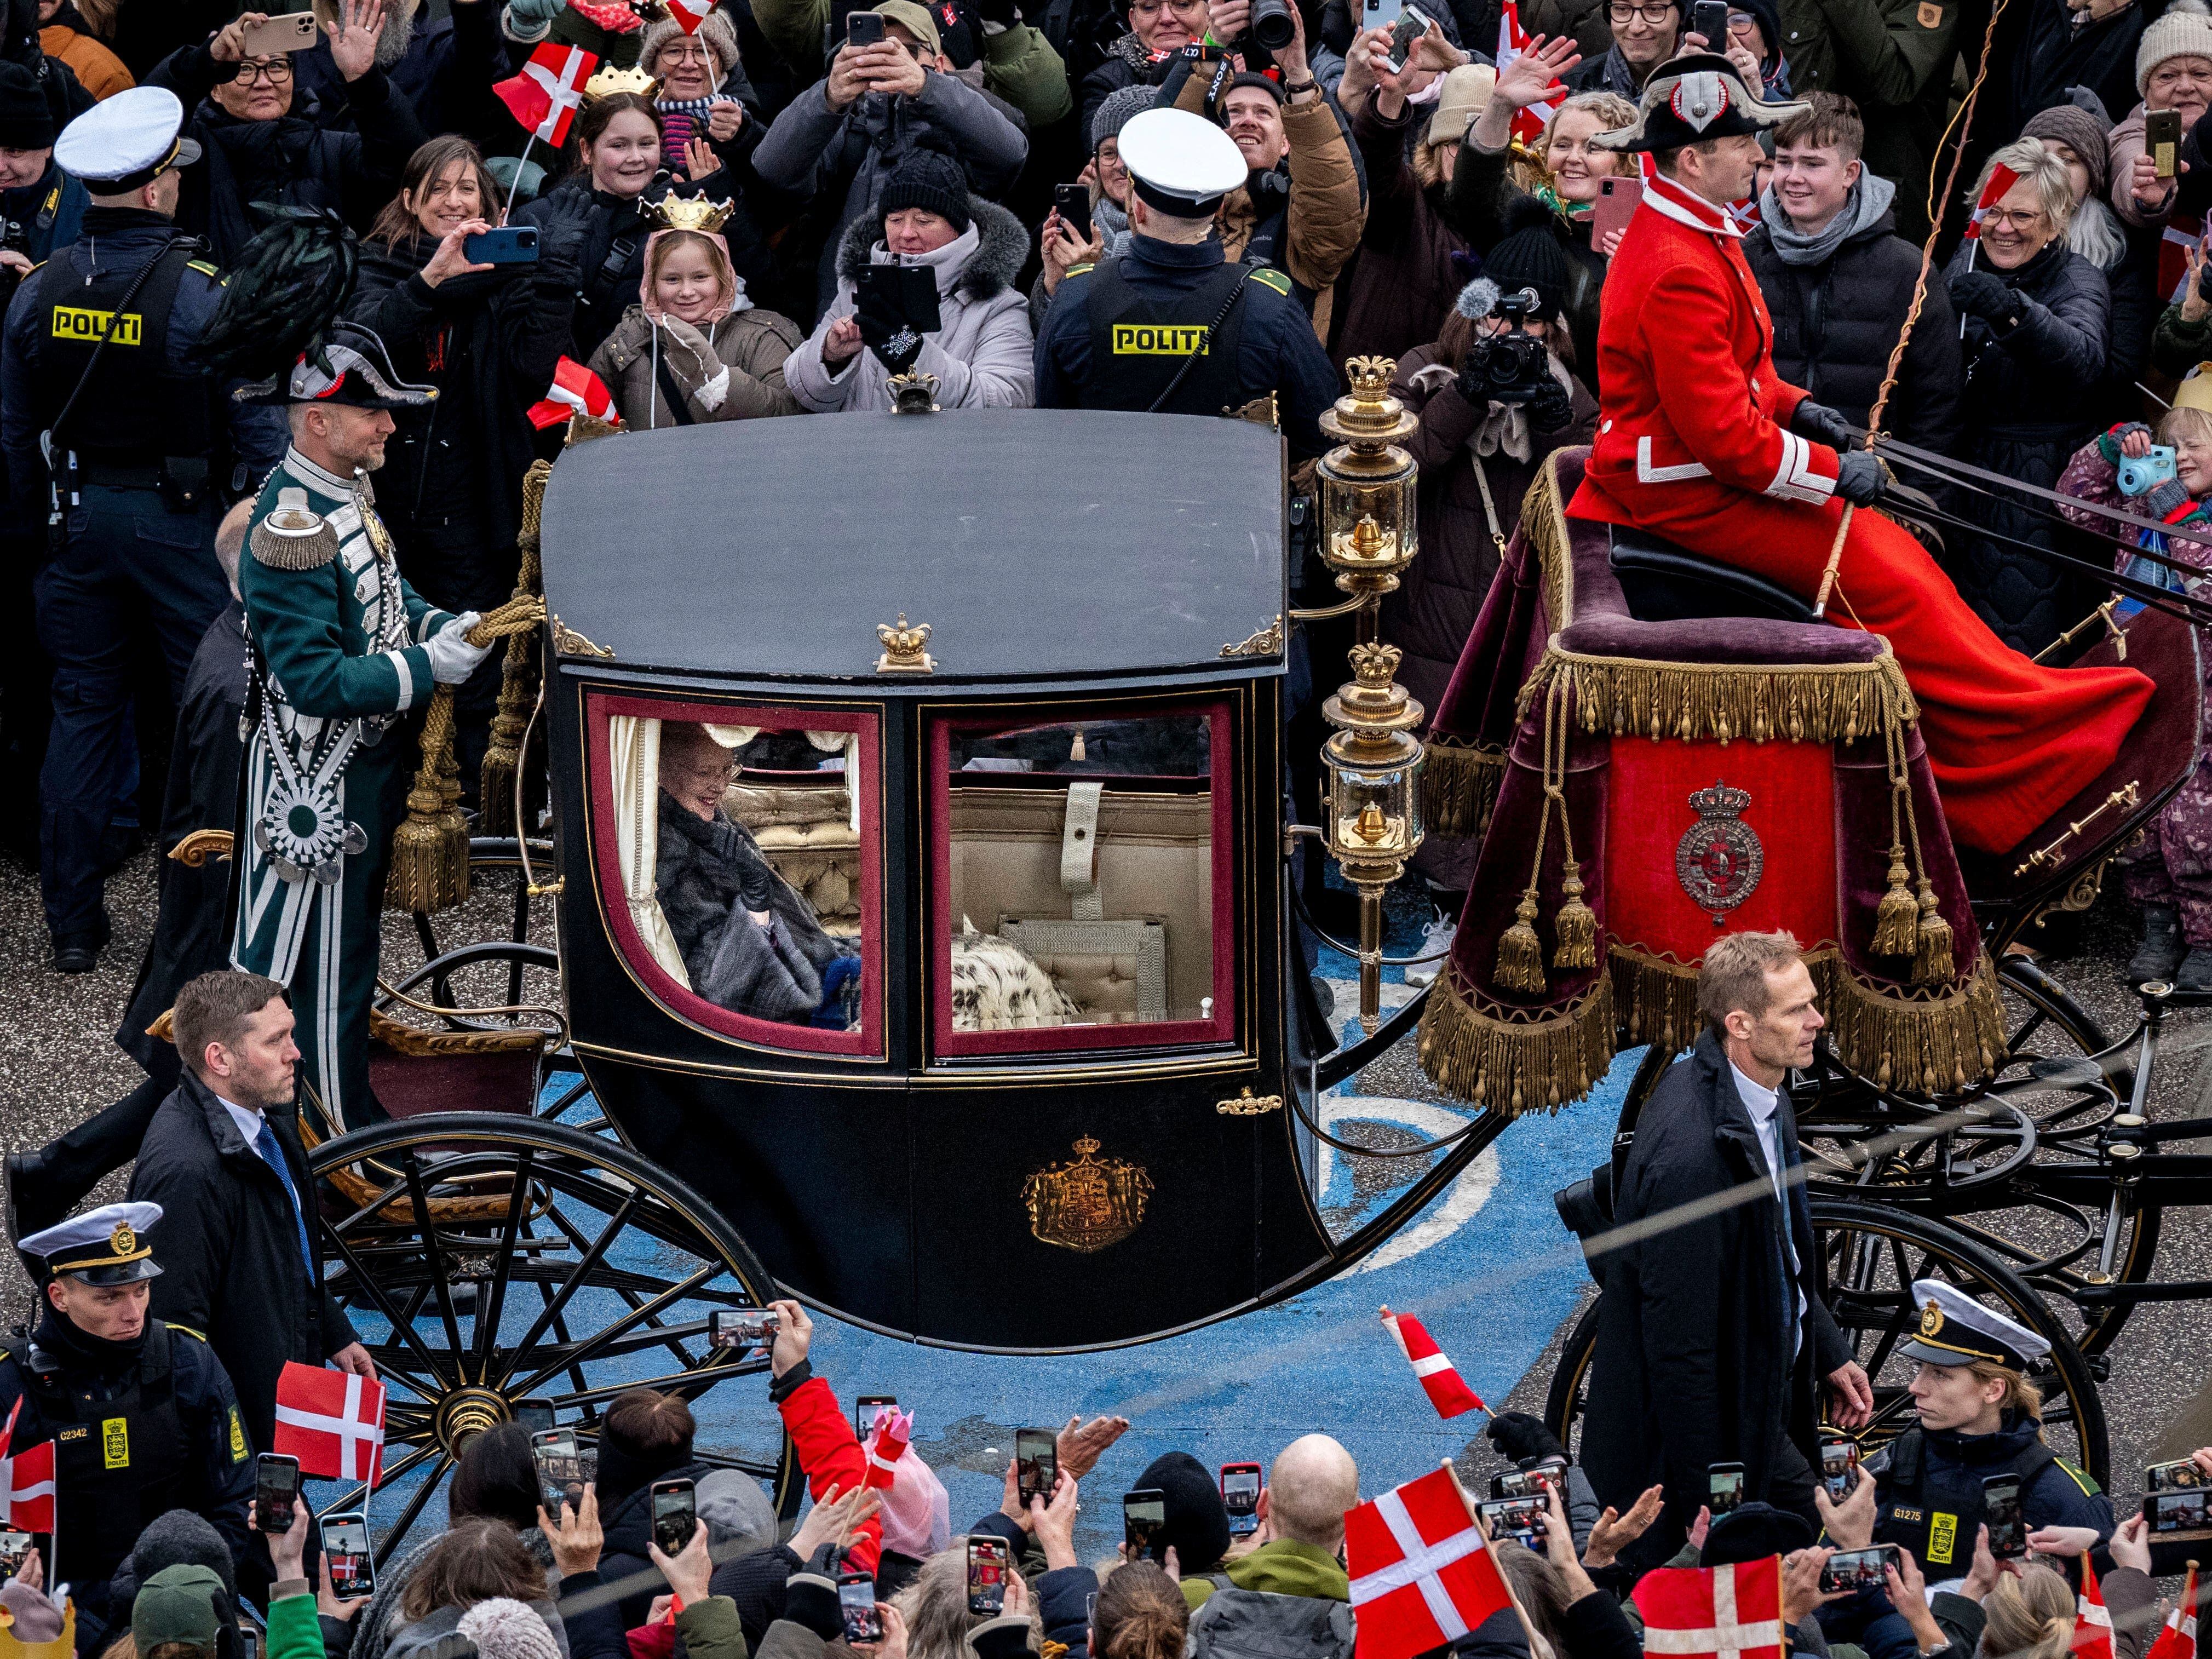 Denmark’s Queen Margrethe signs historic abdication